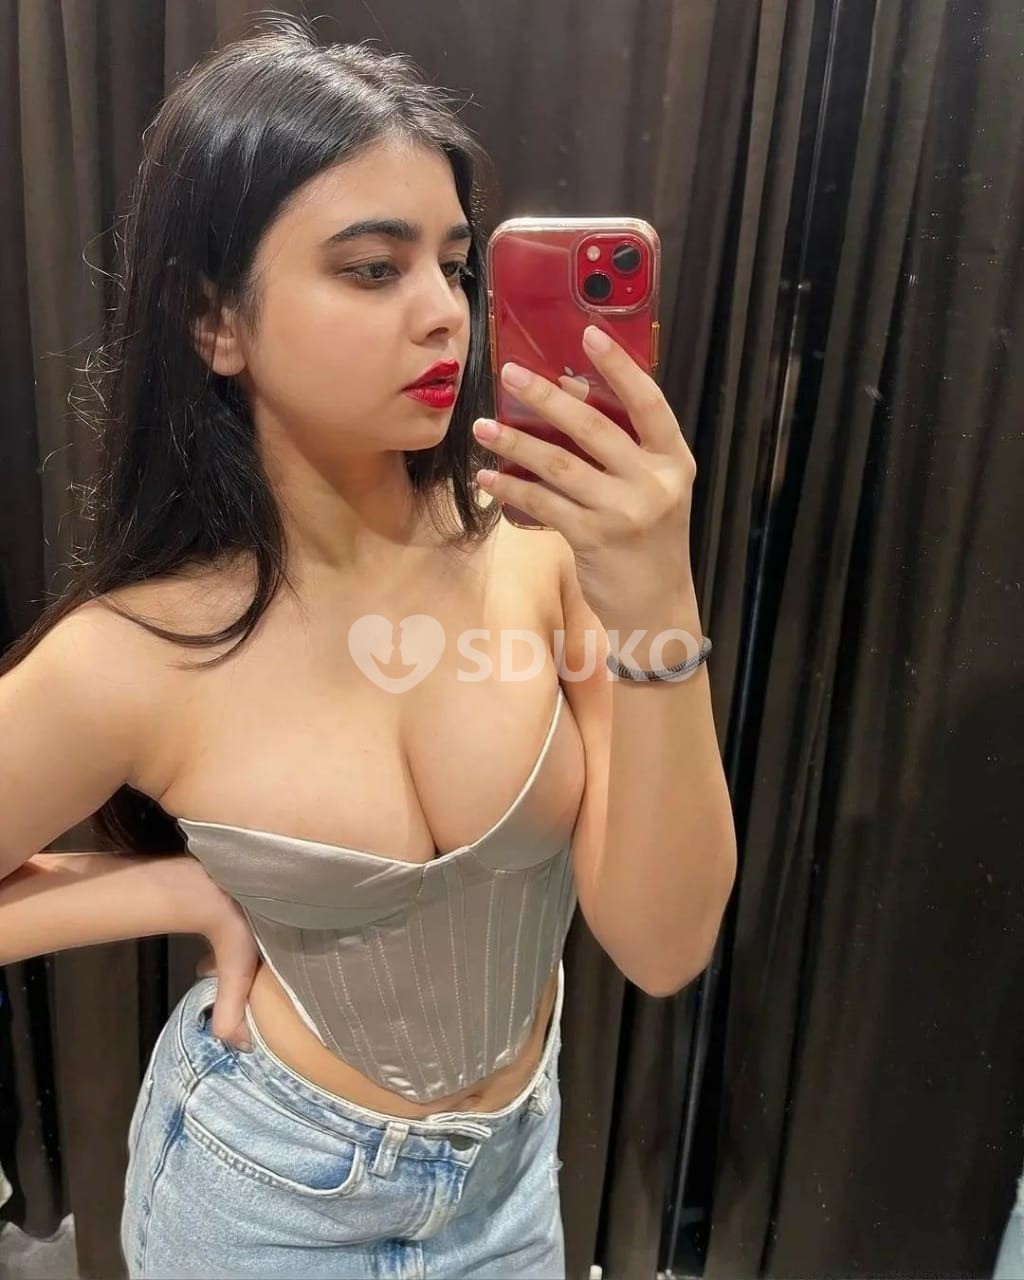 BANDRA VIP TODAY LOW PRICE;/? ESCORT 🥰SERVICE 100% SAFE AND SECURE ANYTIME CALL ME 24 X 7 SERVICE AVAILABLE 100% SAFE